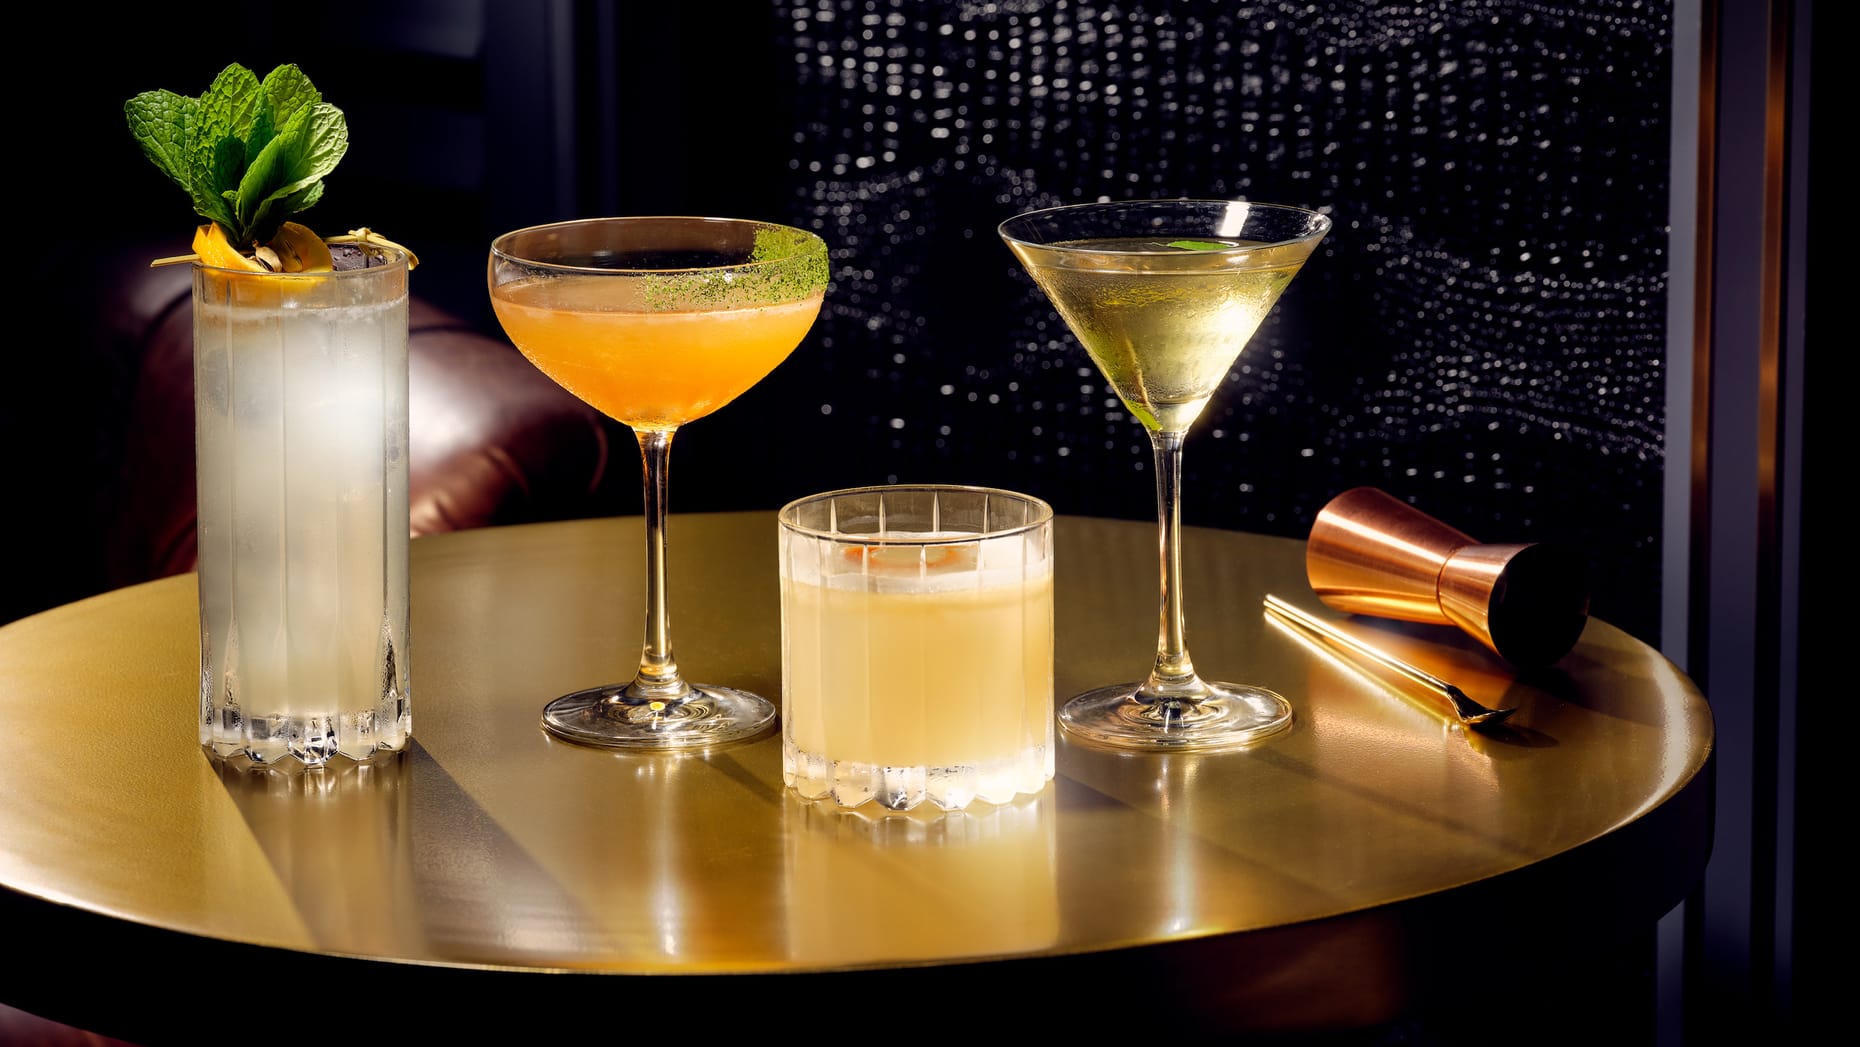 One-Ninety Bar invites you to a premium experience with artisanal spirits.